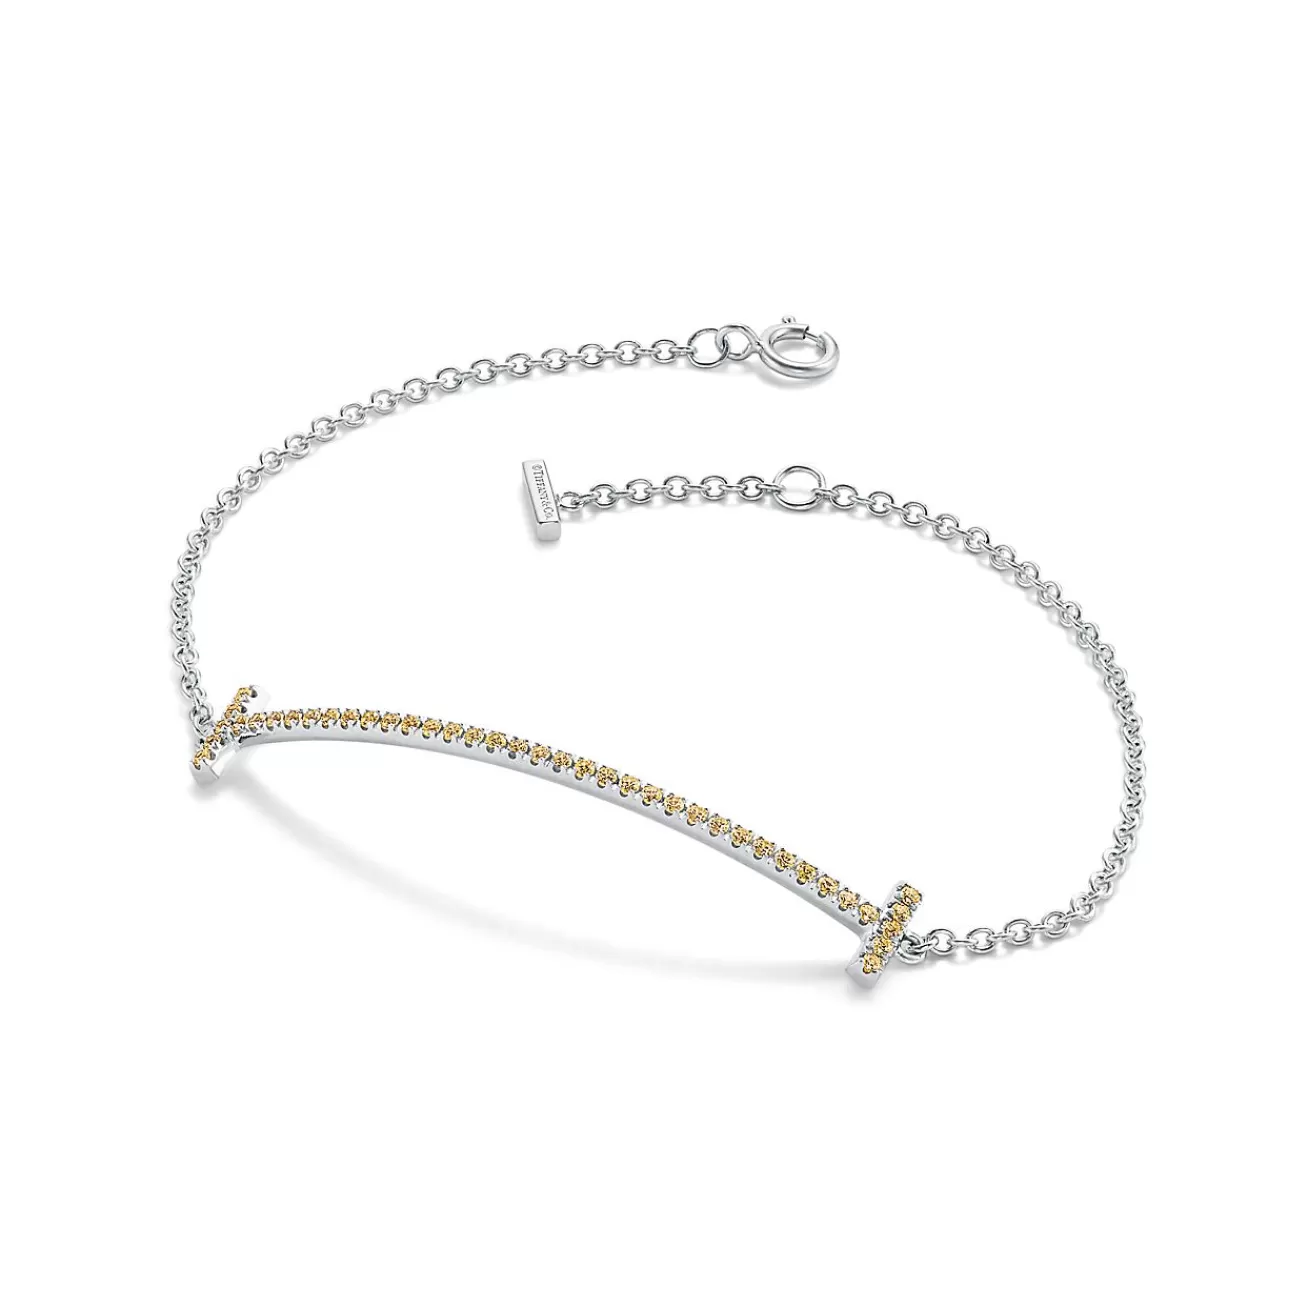 Tiffany & Co. Tiffany T Smile Chain Bracelet in White Gold with Yellow Sapphires | ^ Bracelets | Colored Gemstone Jewelry